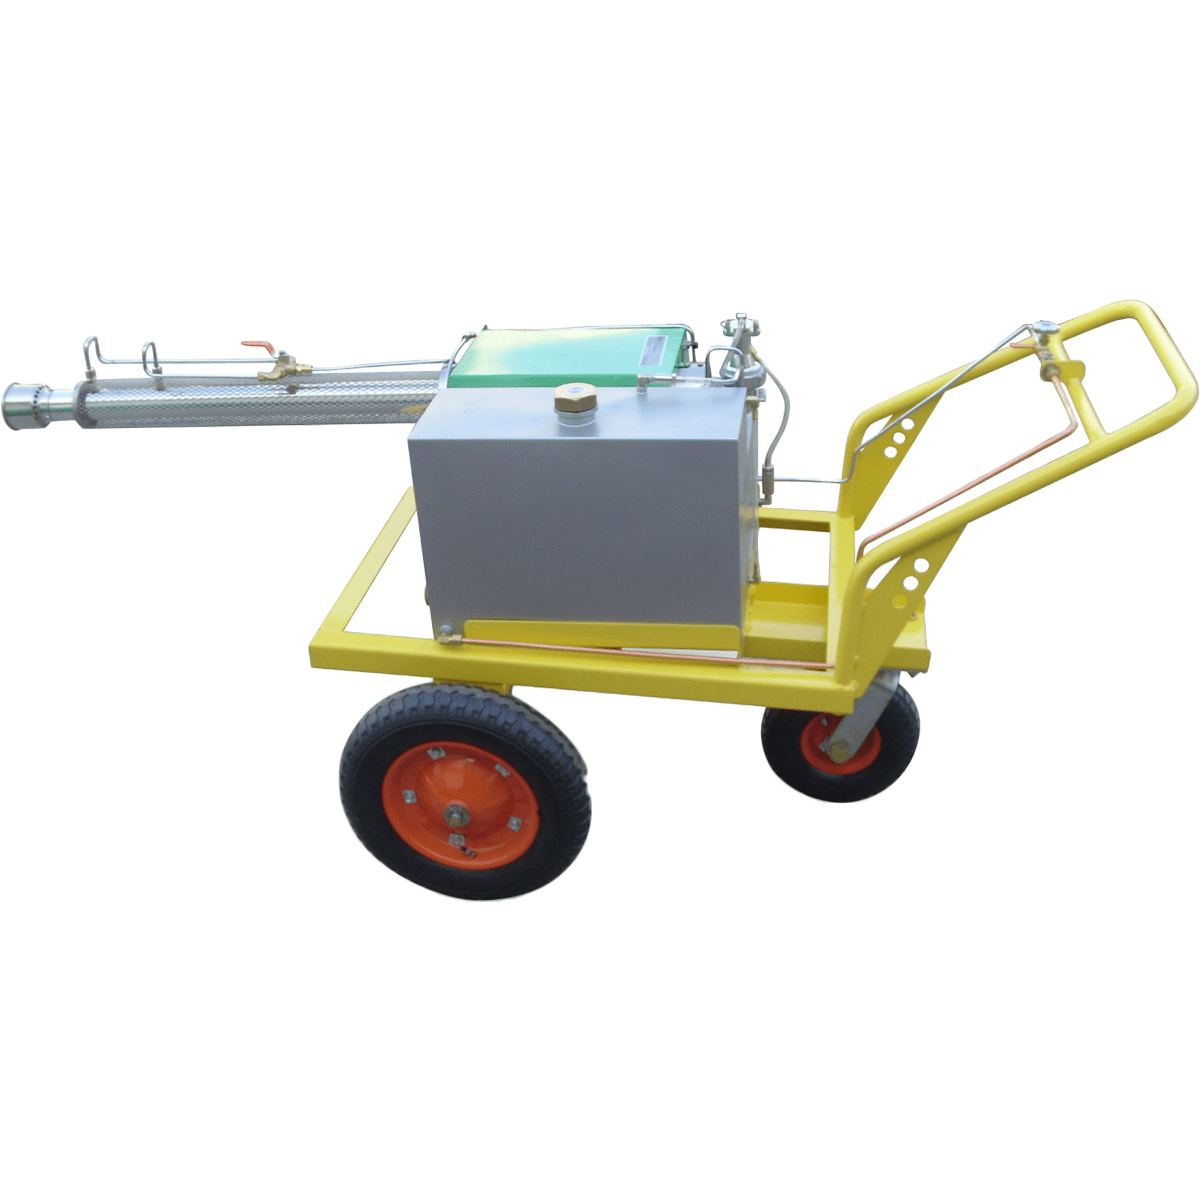 Vectorfog H400SF Trolley Mounted Thermal Fogger w/ Stainless Steel Tank